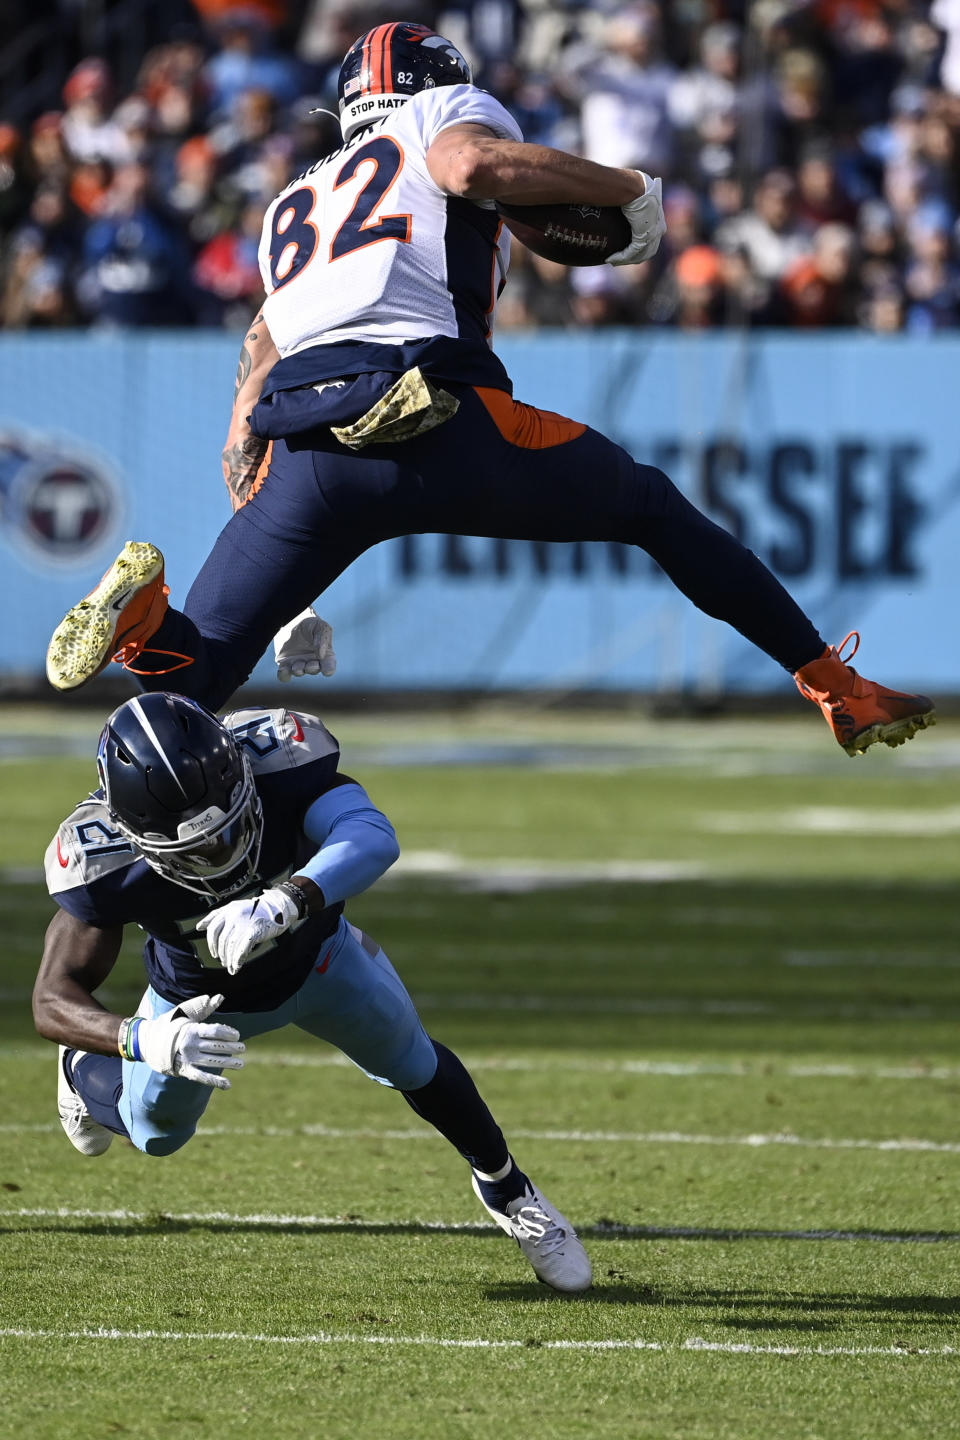 Denver Broncos tight end Eric Saubert (82) leaps over the tackle of Tennessee Titans cornerback Roger McCreary (21) during the second half of an NFL football game, Sunday, Nov. 13, 2022, in Nashville, Tenn. (AP Photo/Mark Zaleski)